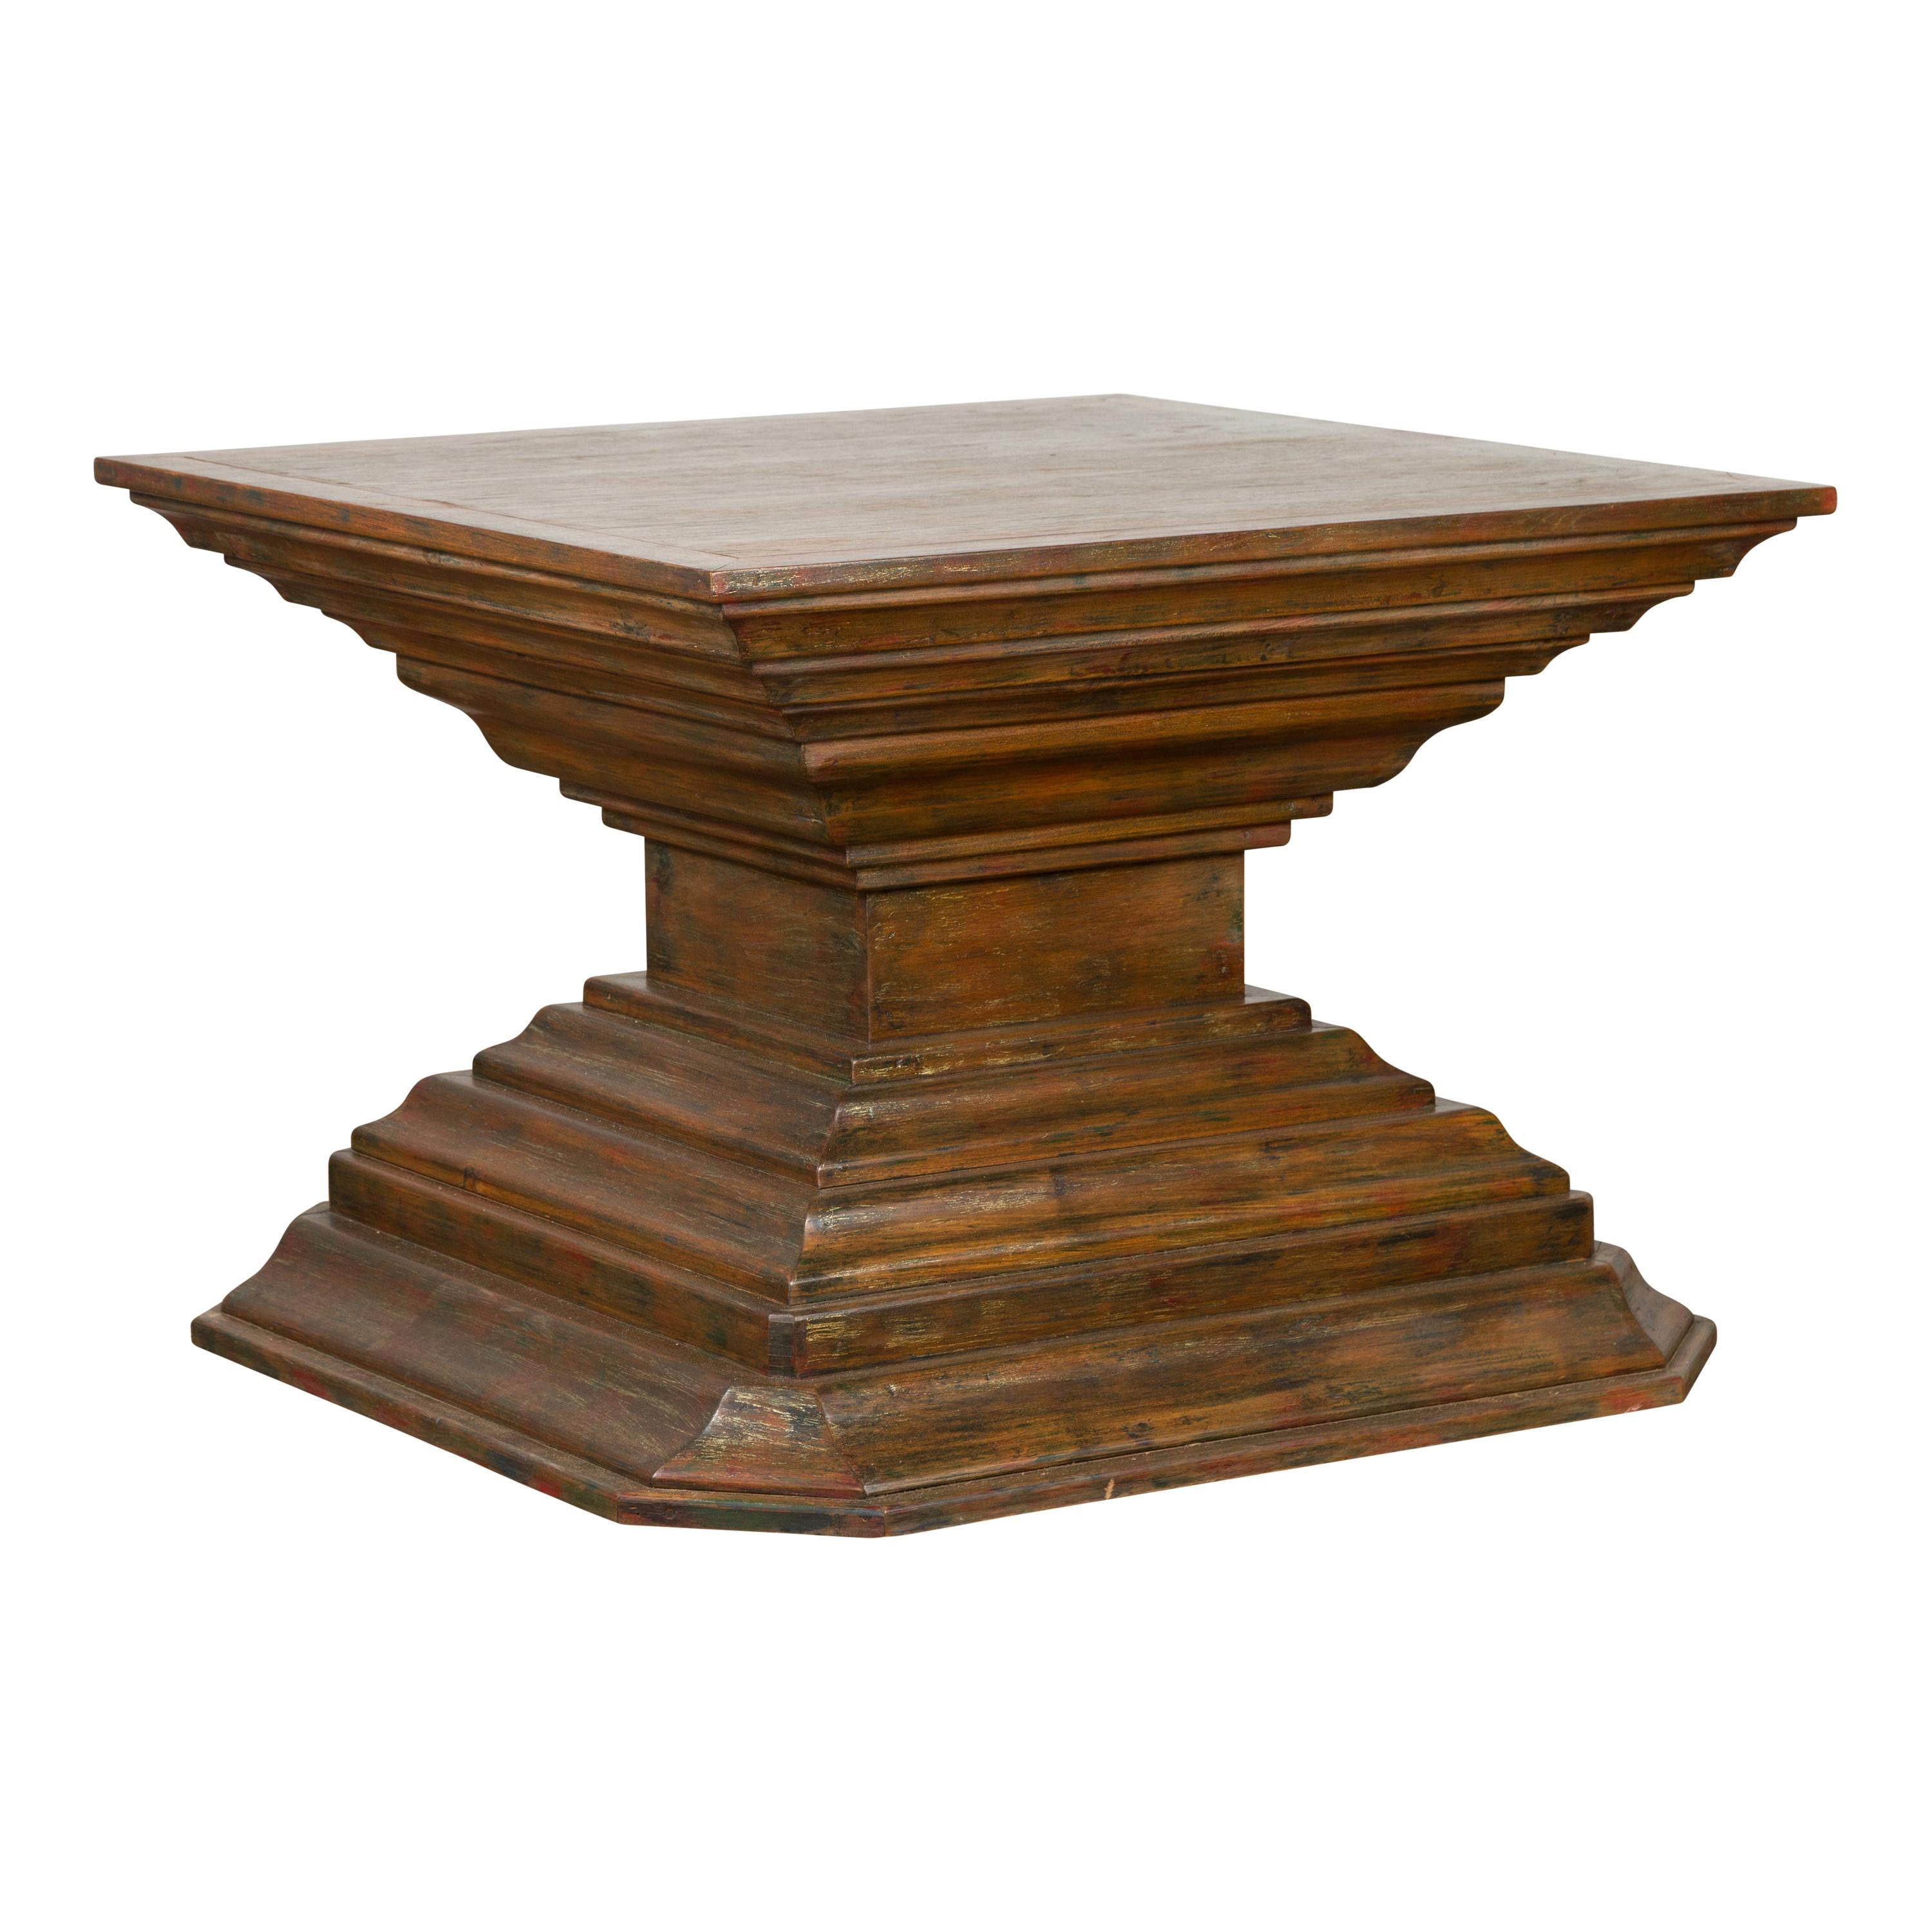 Indonesian Vintage Pagan Dynasty Style Pyramid-Shaped Console Pedestal Table For Sale